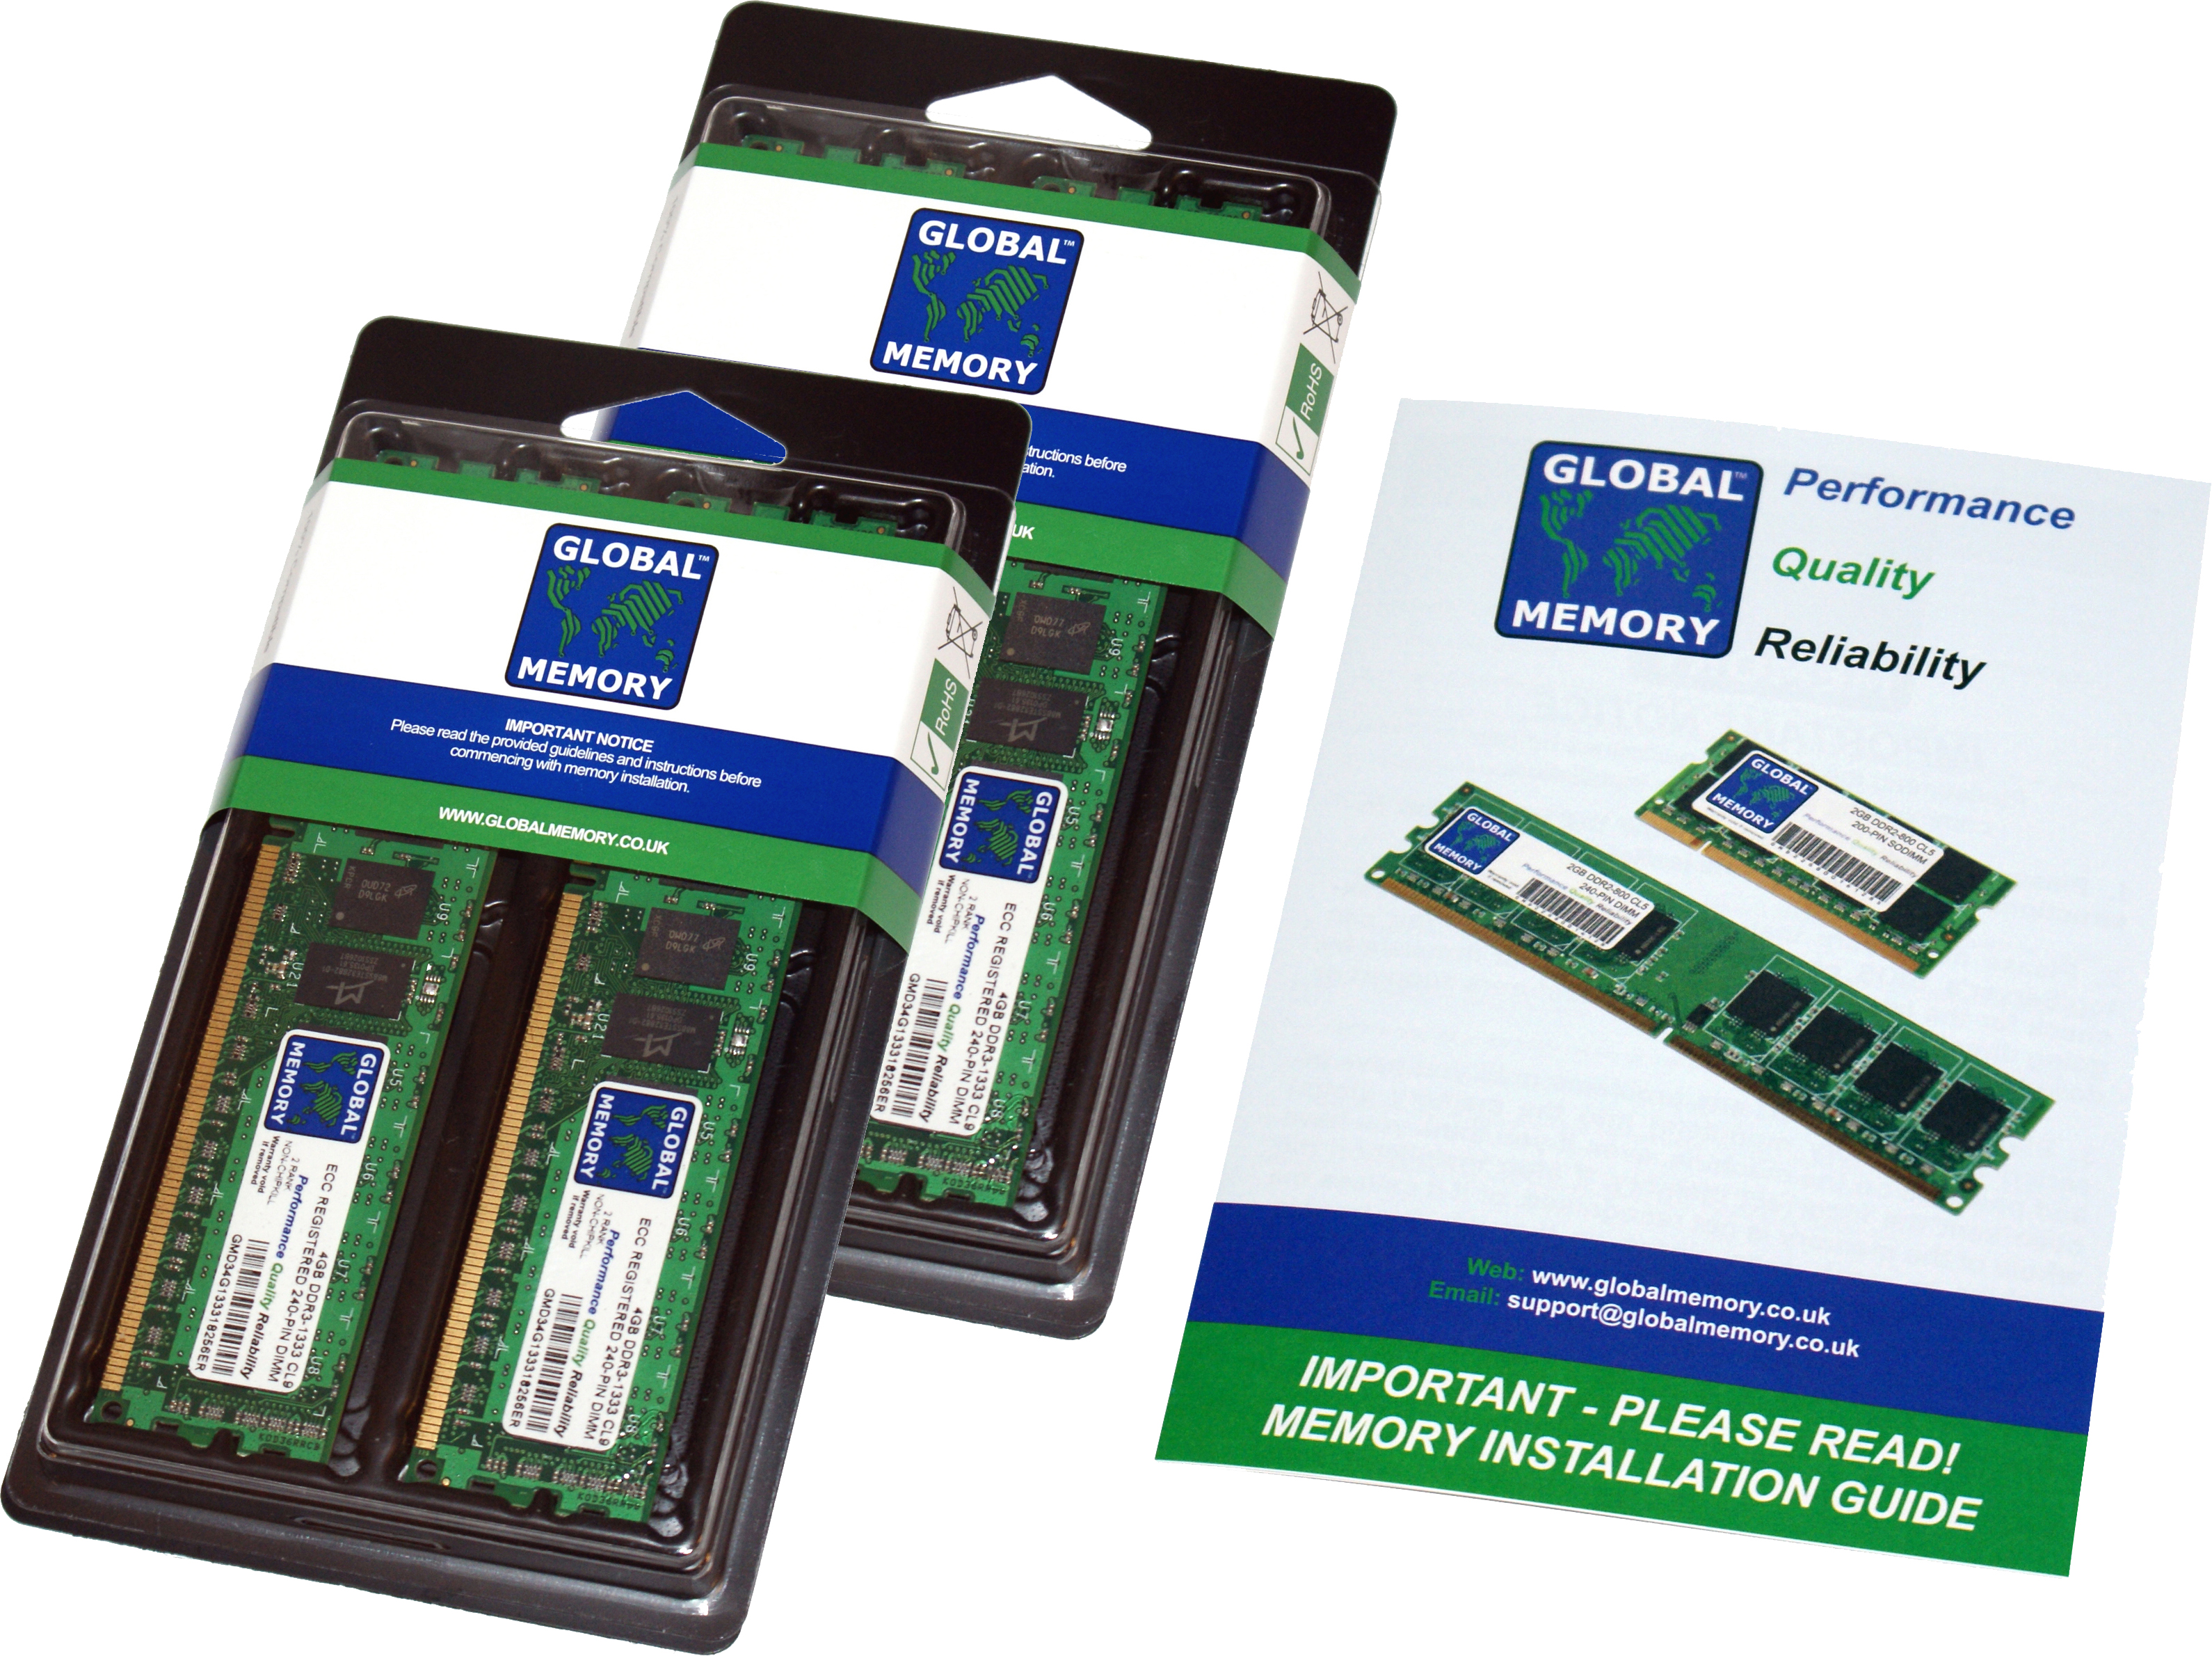 32GB (4 x 8GB) DDR4 2933MHz PC4-23400 288-PIN ECC REGISTERED DIMM (RDIMM) MEMORY RAM KIT FOR ACER SERVERS/WORKSTATIONS/MOTHERBOARDS (4 RANK KIT CHIPKILL)